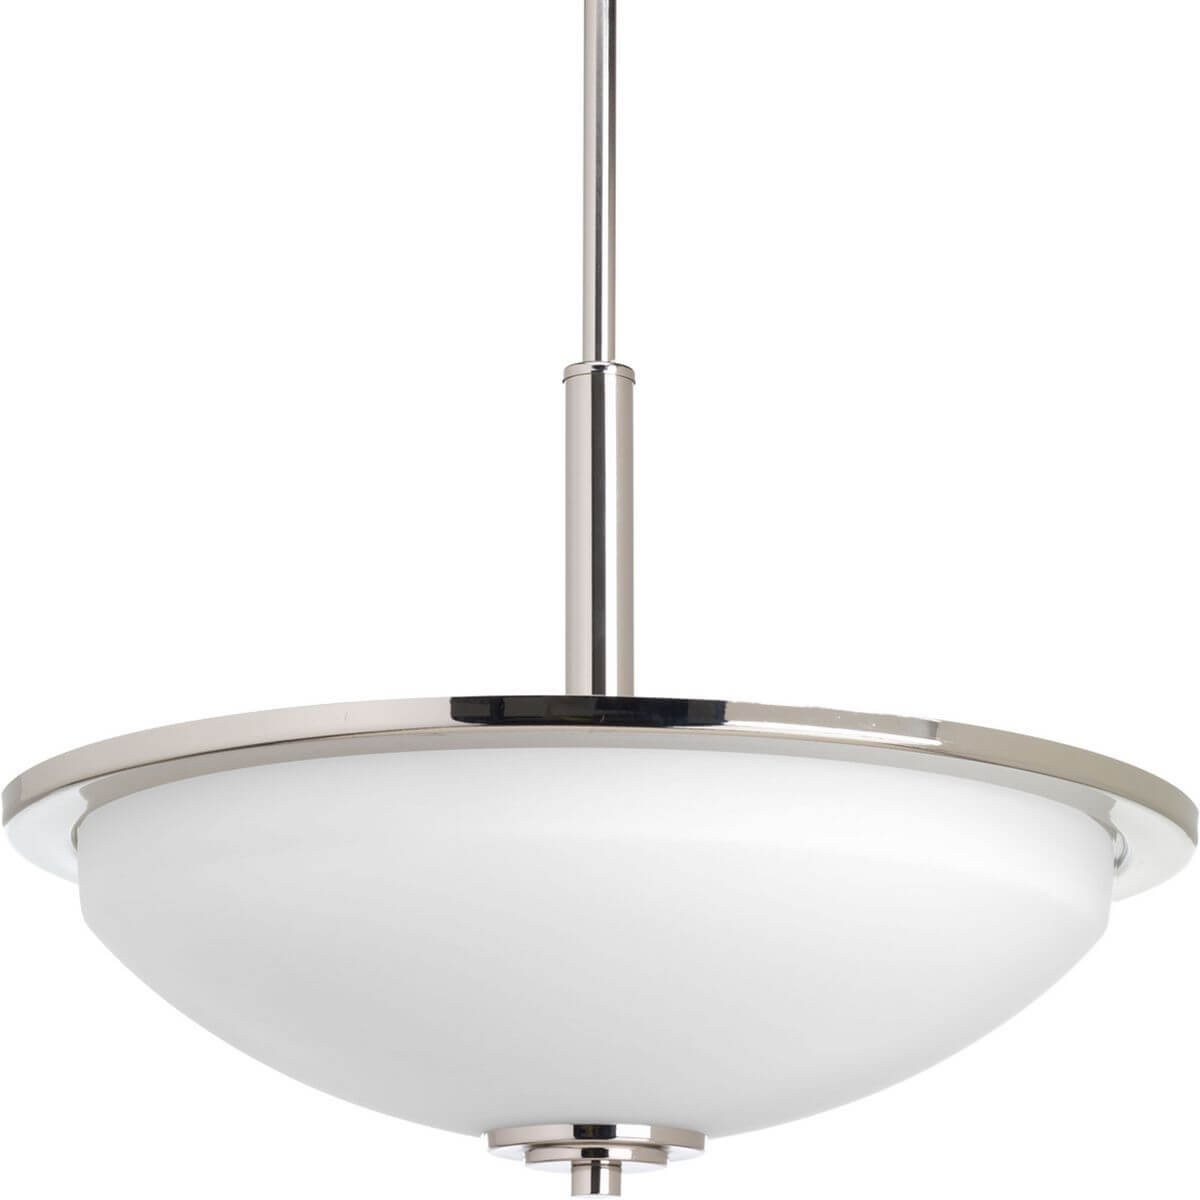 Progress Lighting Replay 3 Light 17 inch Inverted Pendant in Polished Nickel with Etched Outside and Painted White Inside Glass Bowl P3450-104